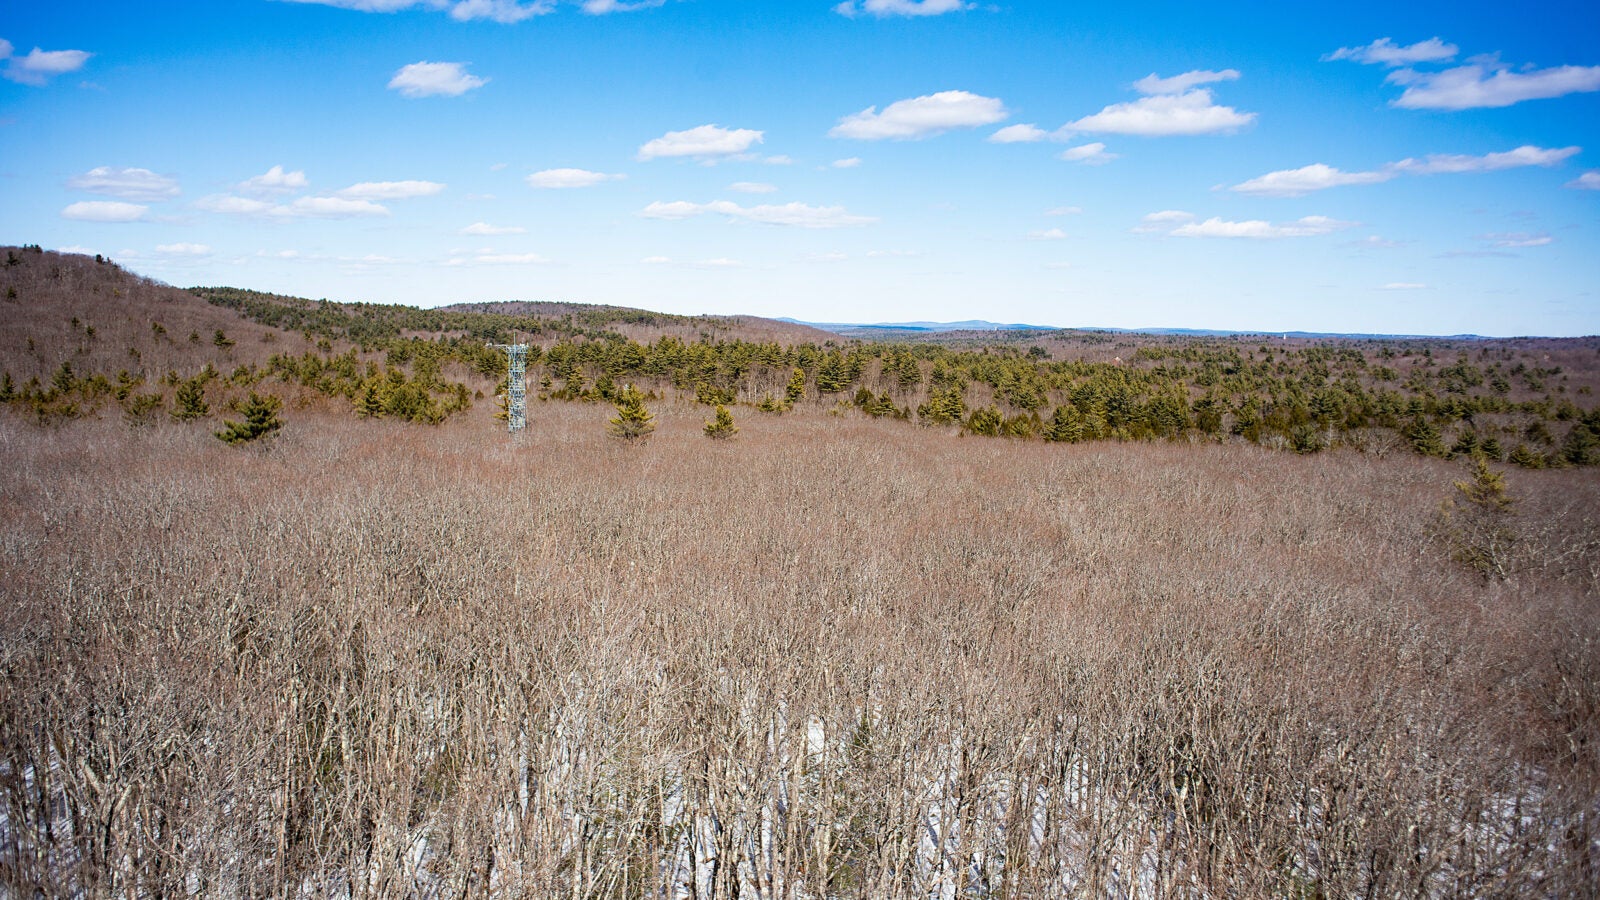 View from tower of Harvard Forest.